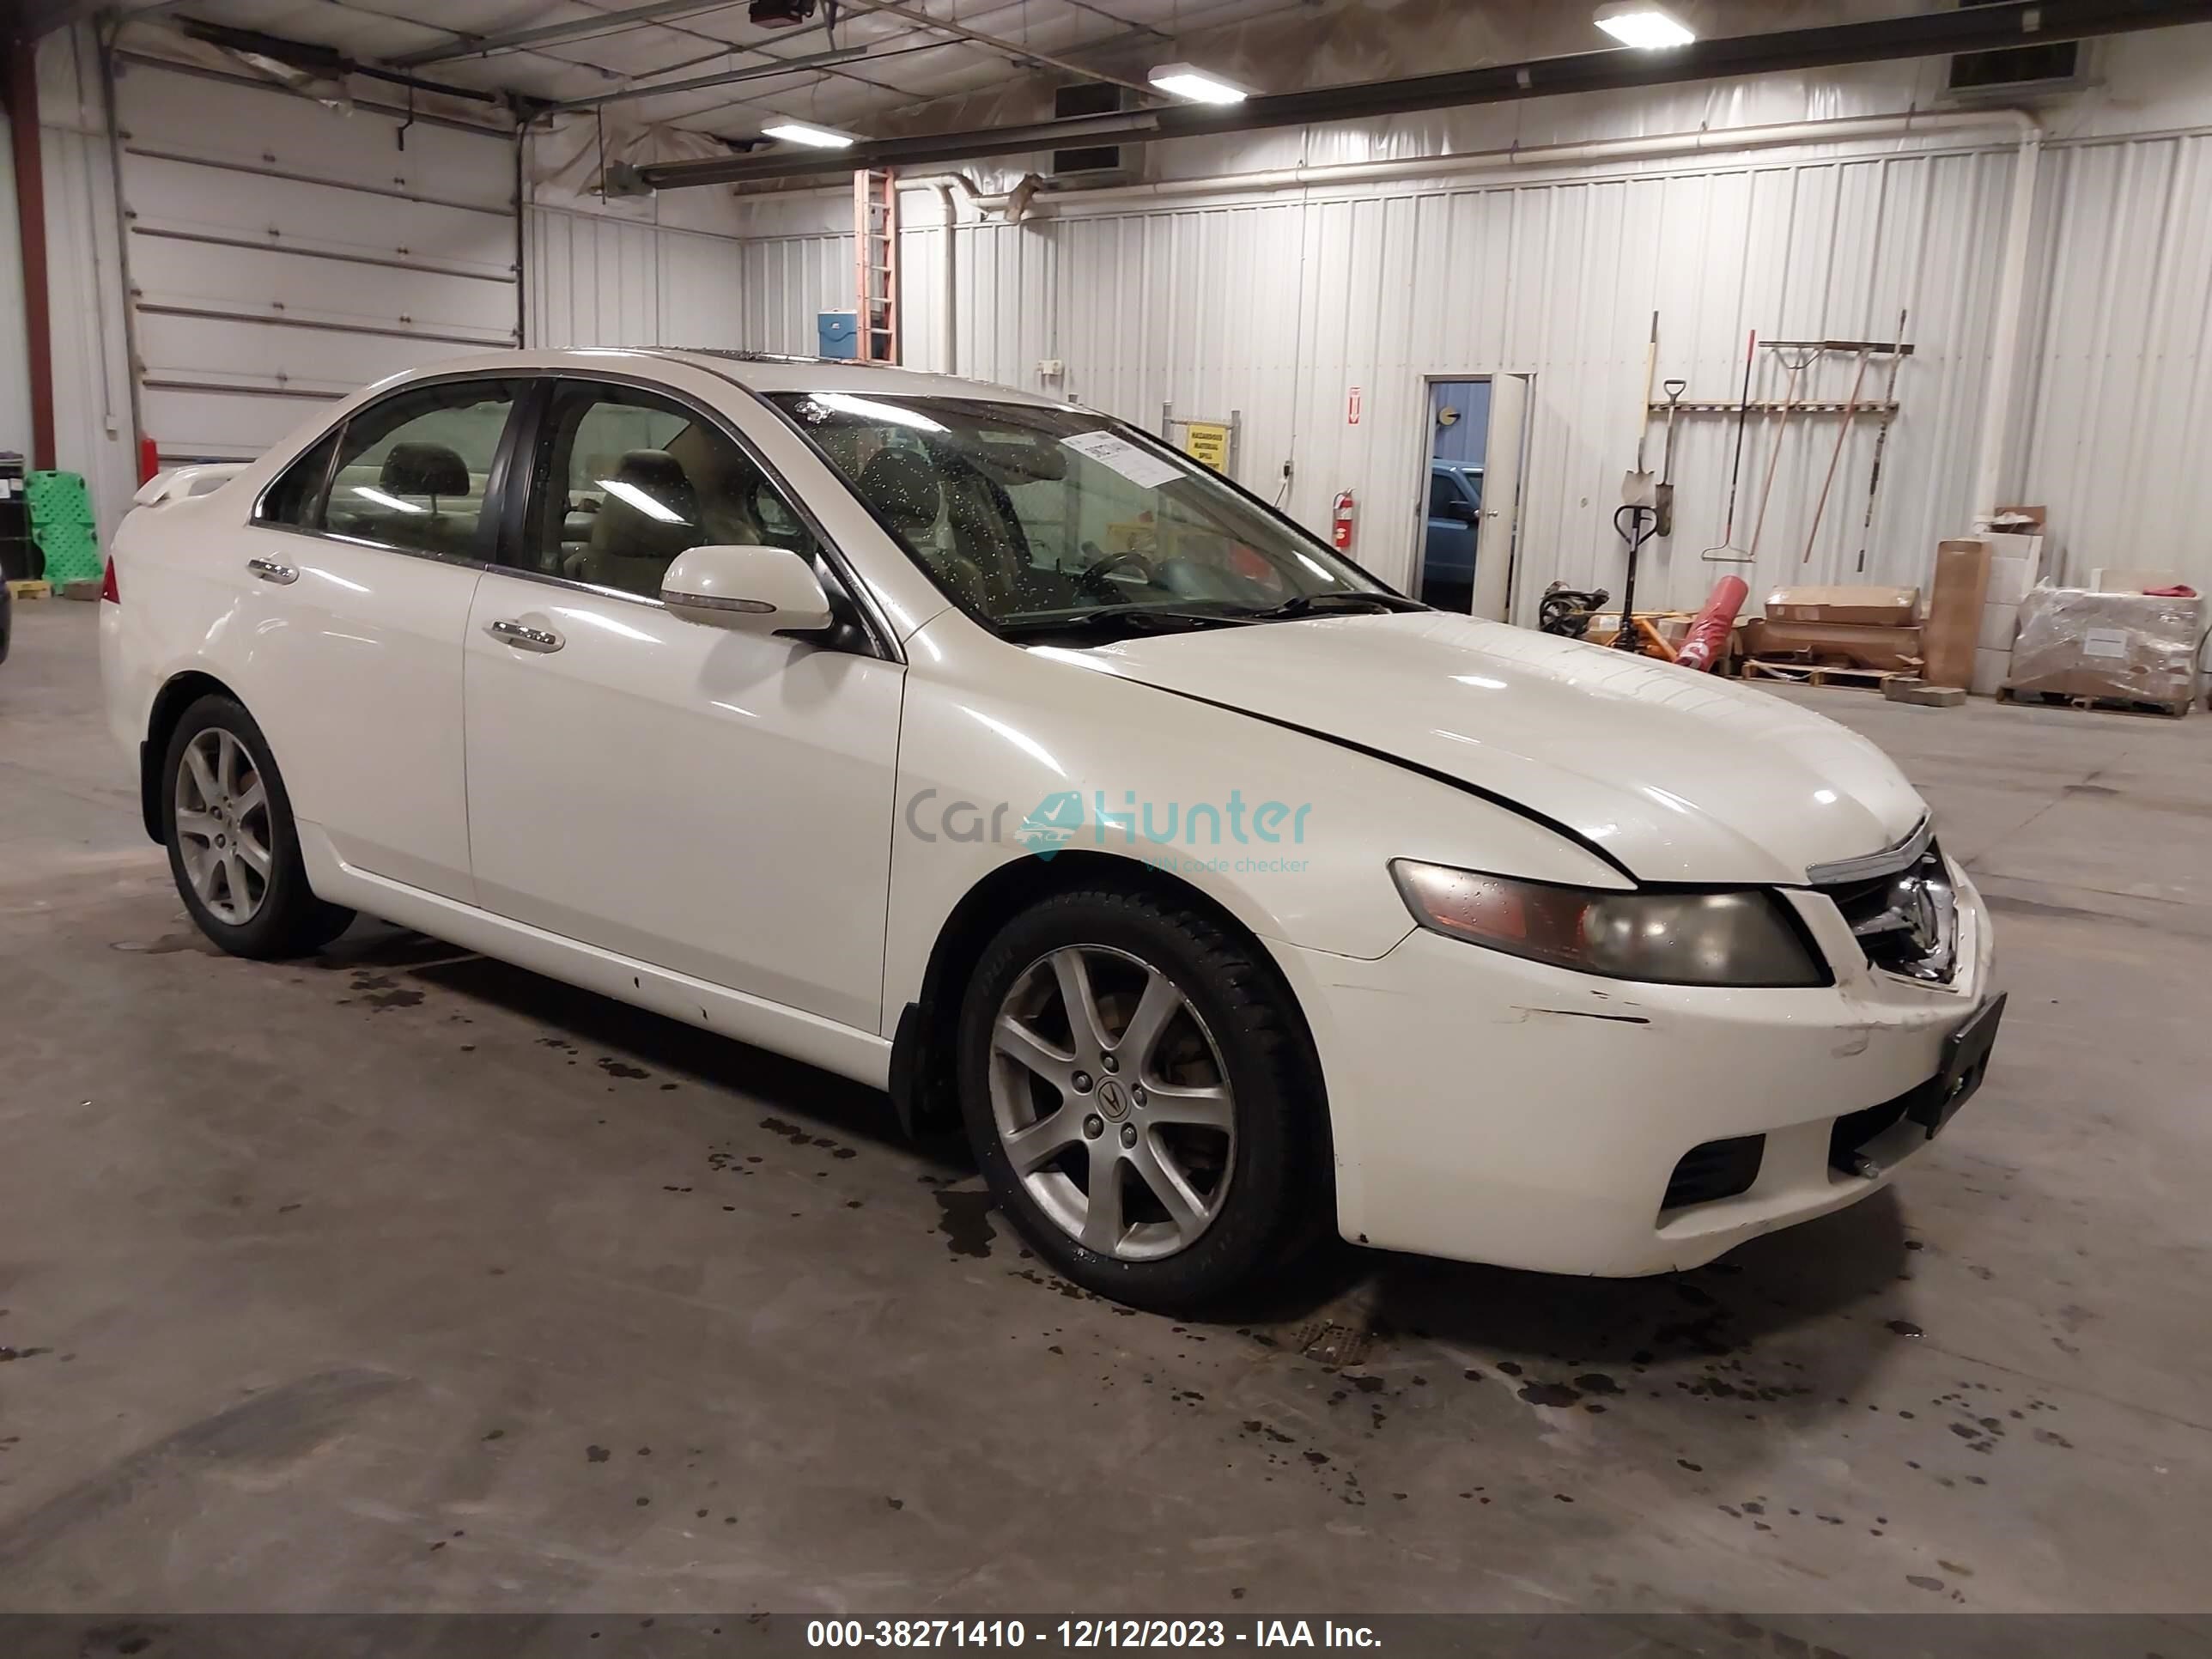 acura tsx 2004 jh4cl96854c002285